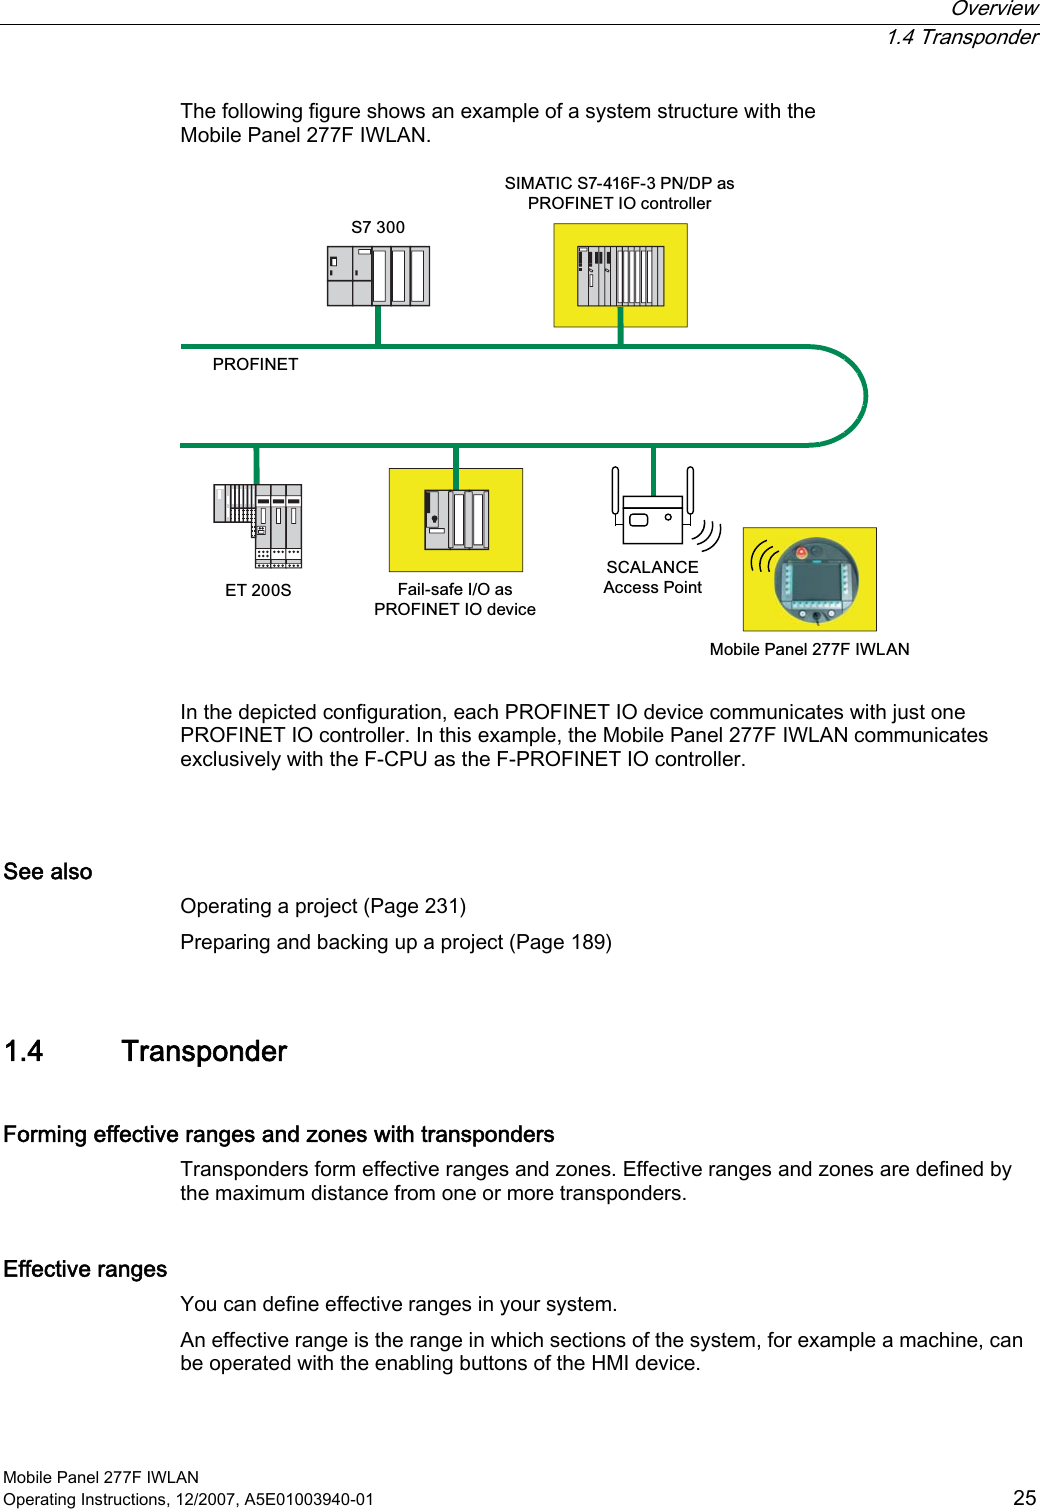  Overview  1.4 Transponder Mobile Panel 277F IWLAN Operating Instructions, 12/2007, A5E01003940-01  25 The following figure shows an example of a system structure with the Mobile Panel 277F IWLAN. 6(76352),1(70RELOH3DQHO),:/$16&amp;$/$1&amp;($FFHVV3RLQW6,0$7,&amp;6)31&apos;3DV352),1(7,2FRQWUROOHU)DLOVDIH,2DV352),1(7,2GHYLFH  In the depicted configuration, each PROFINET IO device communicates with just one PROFINET IO controller. In this example, the Mobile Panel 277F IWLAN communicates exclusively with the F-CPU as the F-PROFINET IO controller.  See also Operating a project (Page 231) Preparing and backing up a project (Page 189) 1.4 Transponder Forming effective ranges and zones with transponders Transponders form effective ranges and zones. Effective ranges and zones are defined by the maximum distance from one or more transponders. Effective ranges  You can define effective ranges in your system. An effective range is the range in which sections of the system, for example a machine, can be operated with the enabling buttons of the HMI device. 